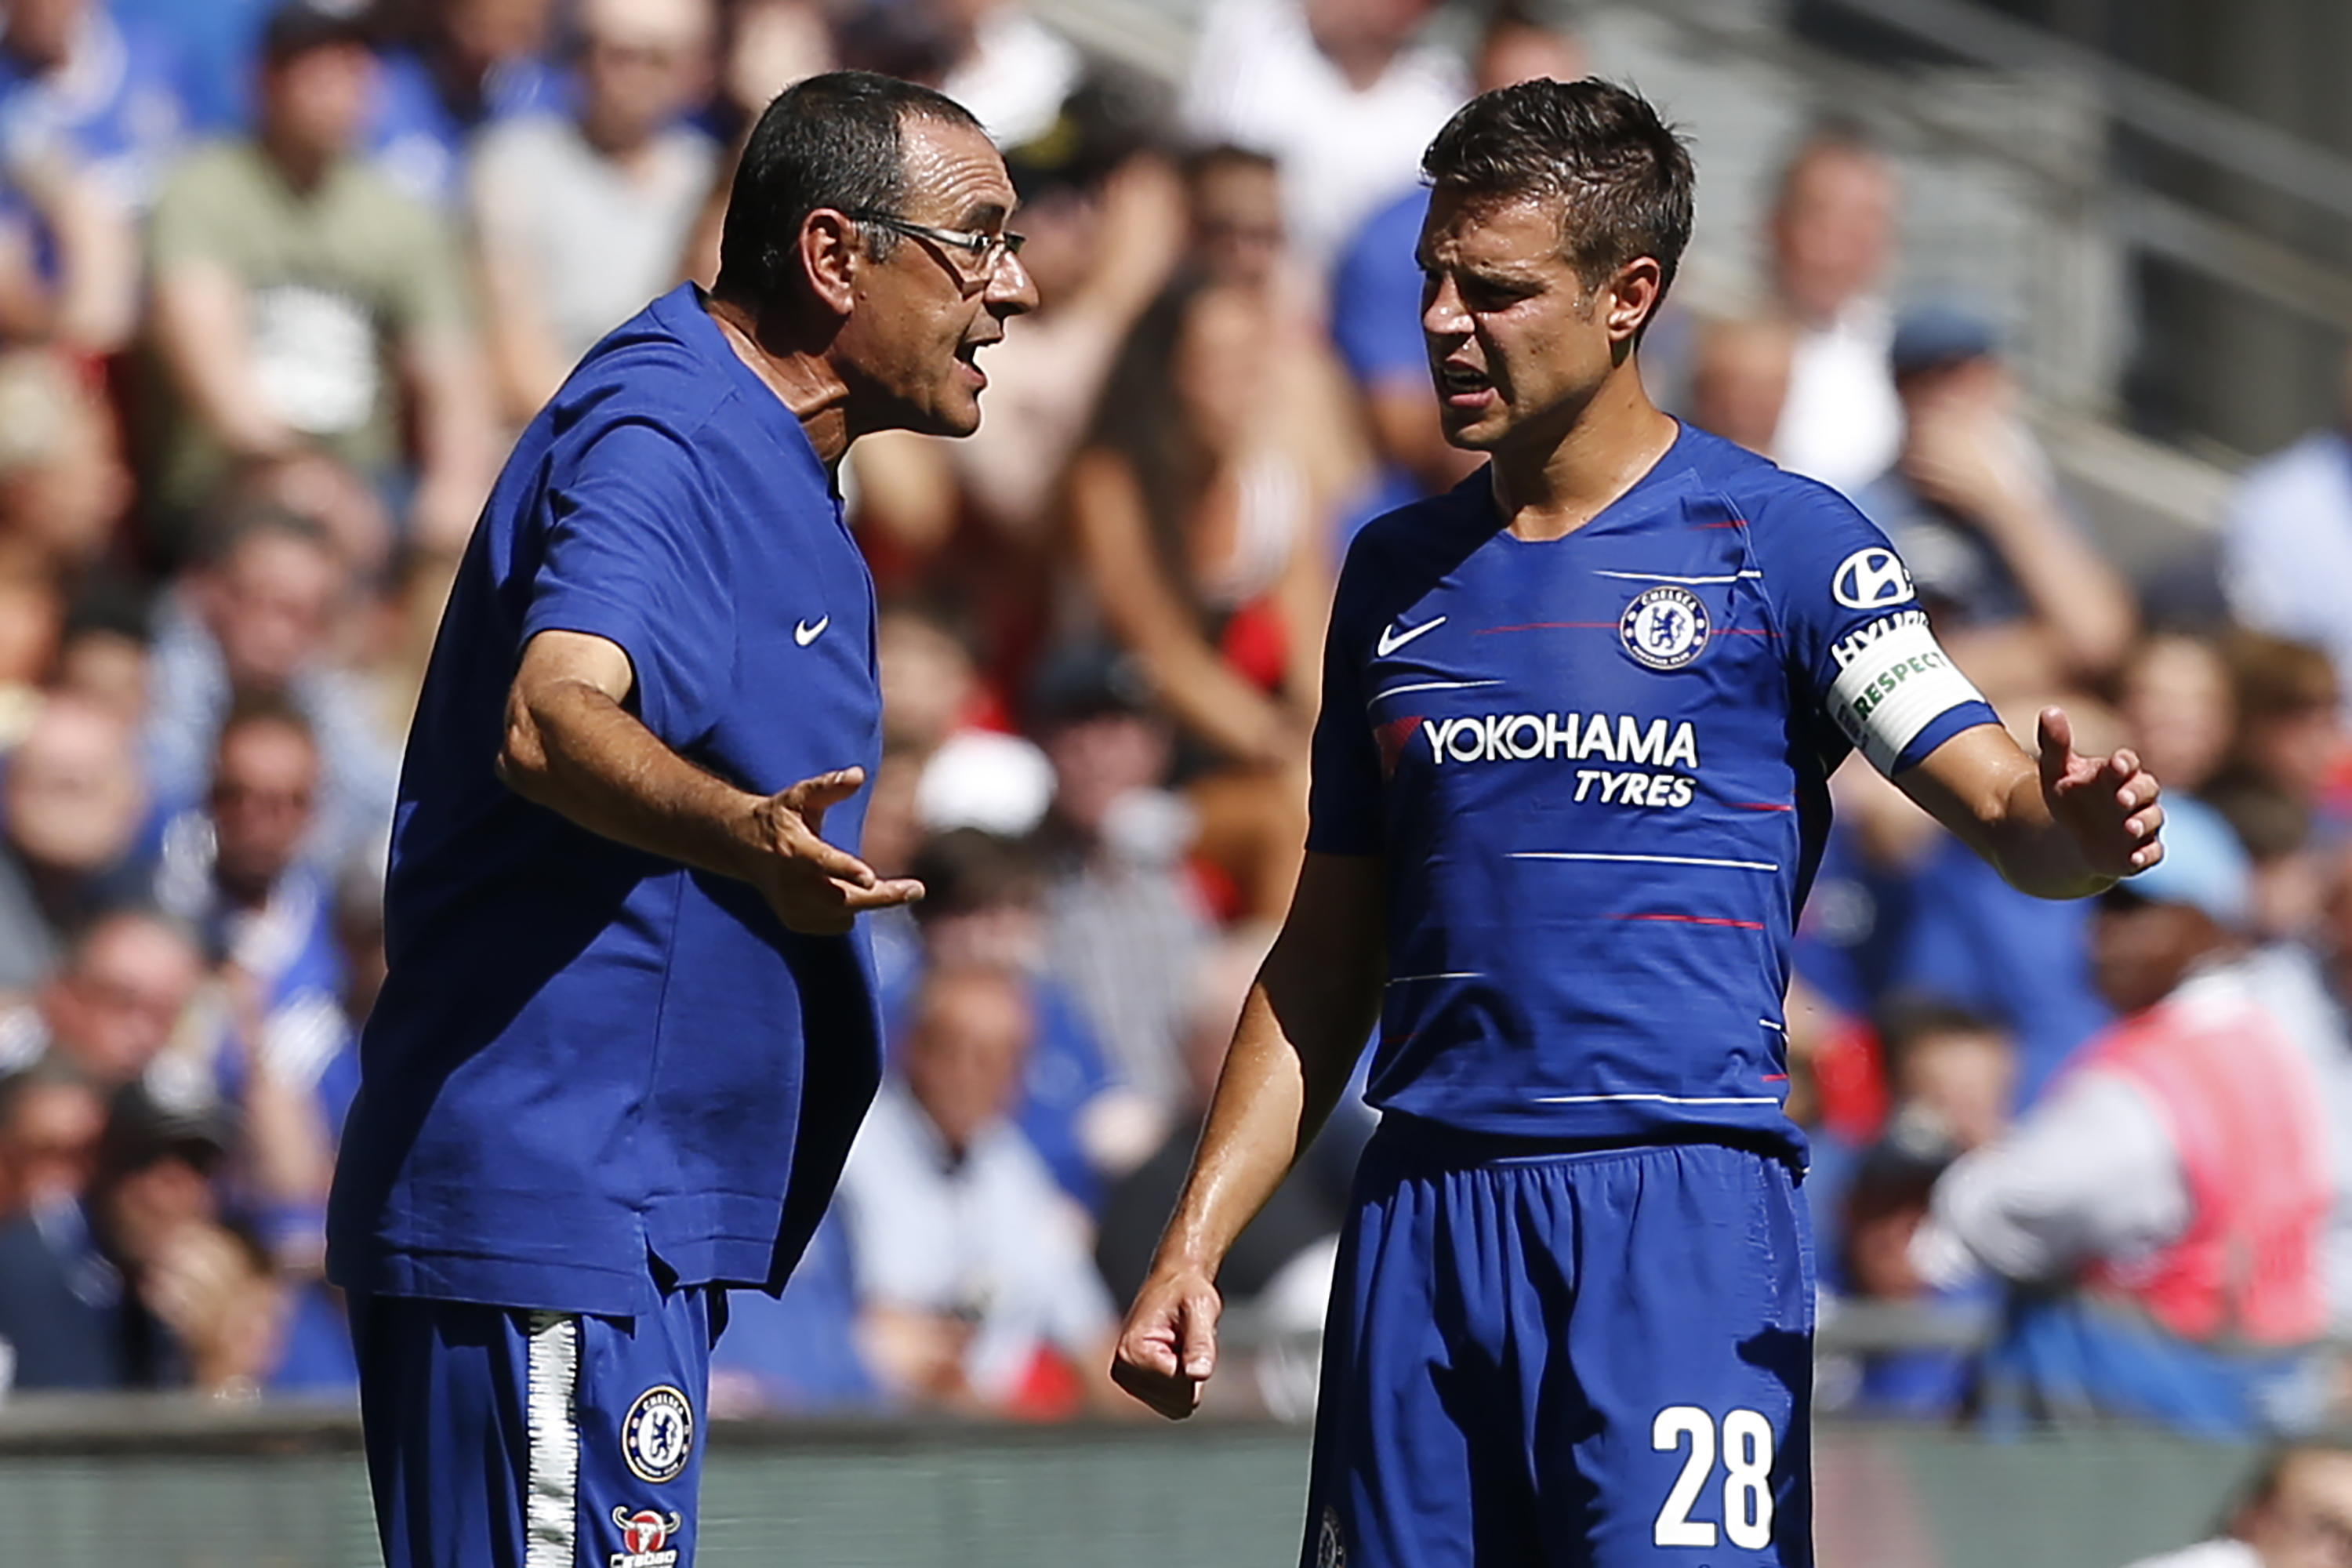 Chelsea's Italian head coach Maurizio Sarri (L) talks with Chelsea's Spanish defender Cesar Azpilicueta on the touchline during the English FA Community Shield football match between Chelsea and Manchester City at Wembley Stadium in north London on August 5, 2018. (Photo by Ian KINGTON / AFP) / NOT FOR MARKETING OR ADVERTISING USE / RESTRICTED TO EDITORIAL USE        (Photo credit should read IAN KINGTON/AFP/Getty Images)